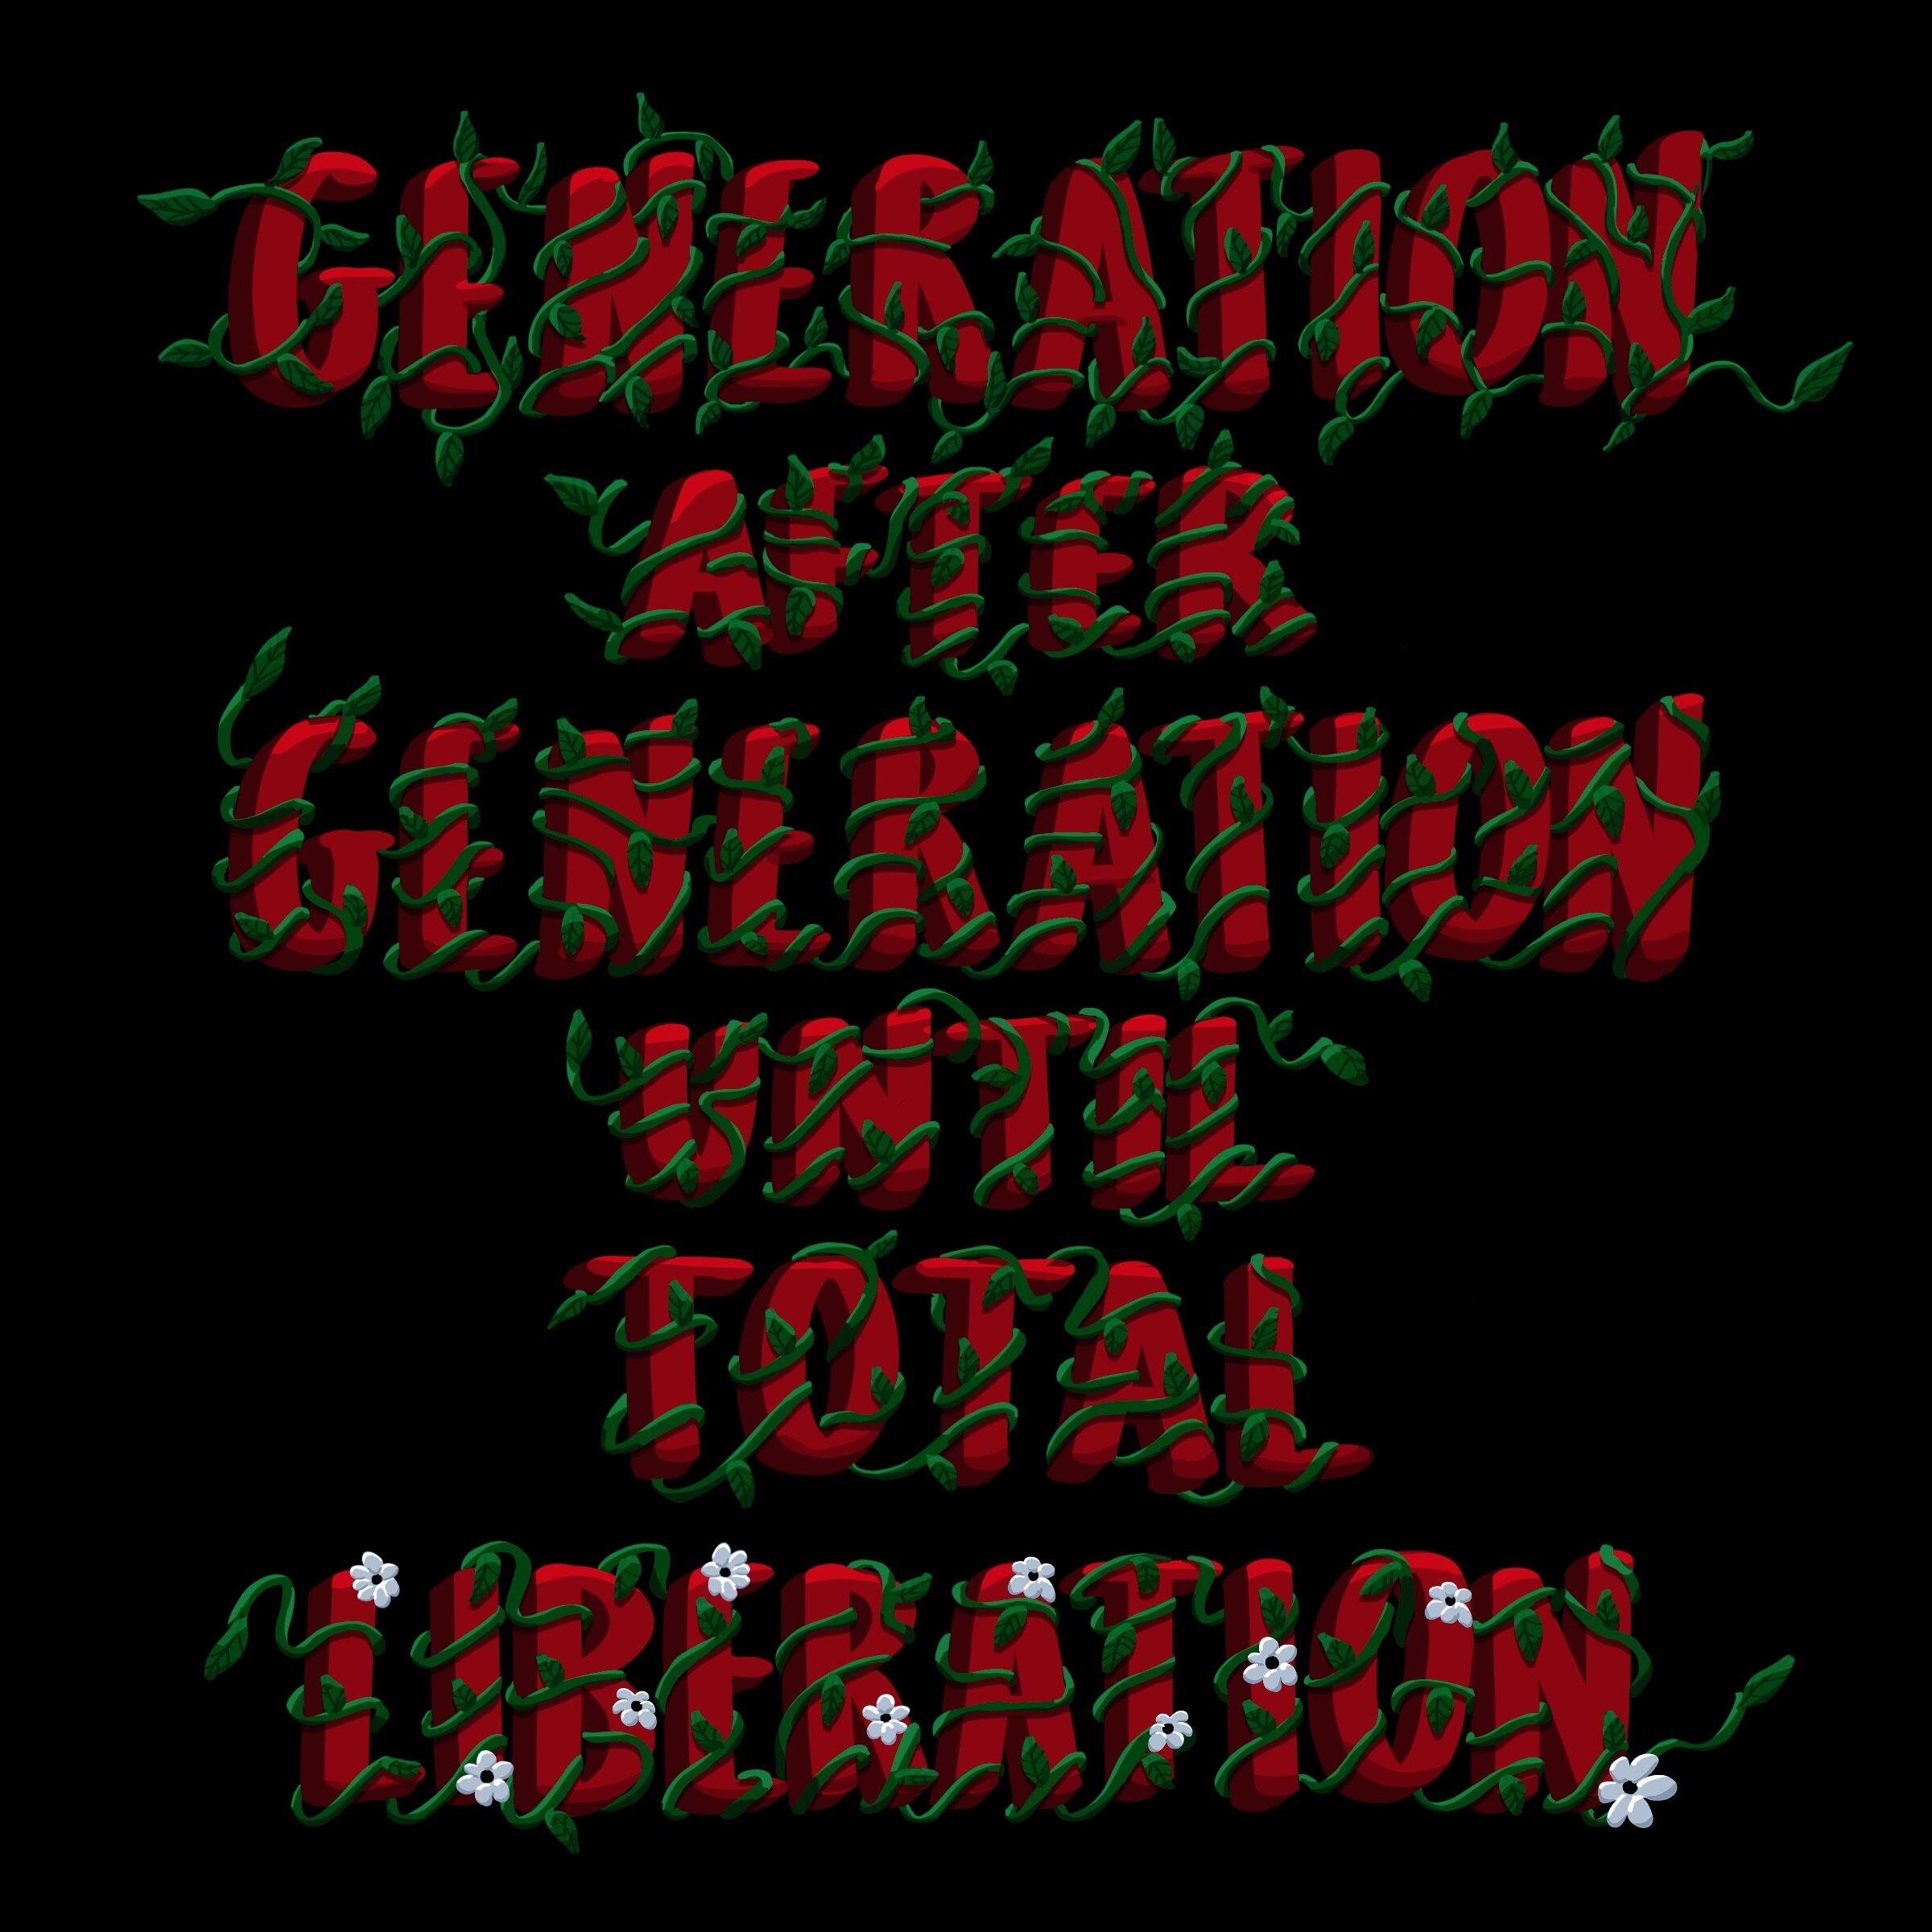 GENERATION AFTER GENERATION UNTIL TOTAL LIBERATION - I was inspired to make this after attending today&rsquo;s Letters for Palestine event and seeing such vibrant &amp; loving community come together to demand a permanent ceasefire and end to the occ